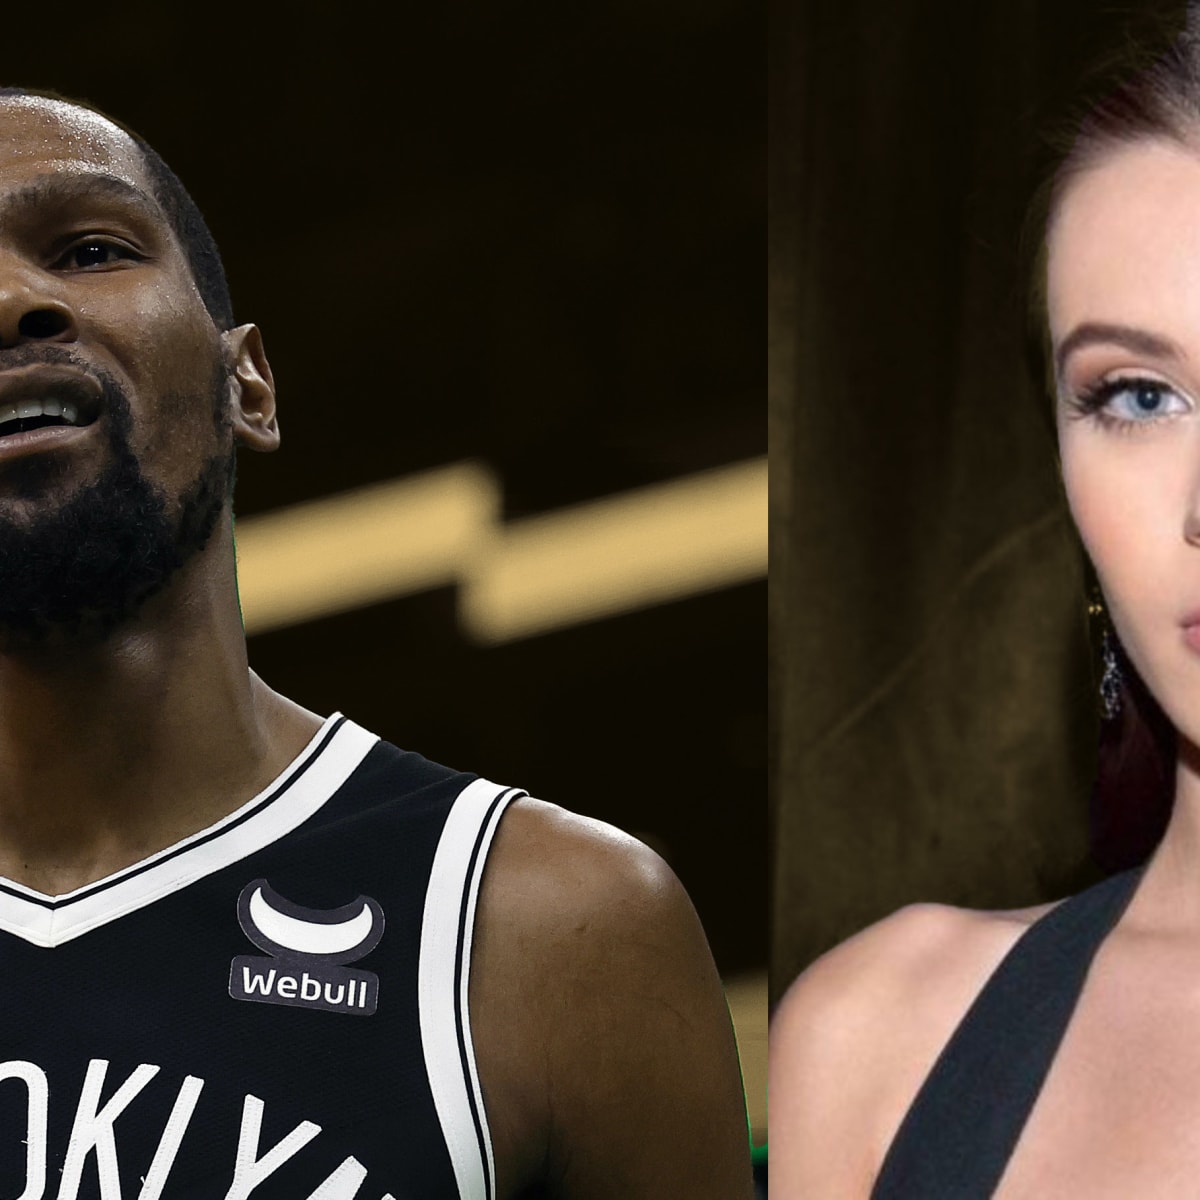 Pregnant Porn Stars Names - Former pornstar Lana Rhodes blasts an NBA player that got her pregnant in a  new Instagram video, and fans believe it's Kevin Durant - Basketball  Network - Your daily dose of basketball